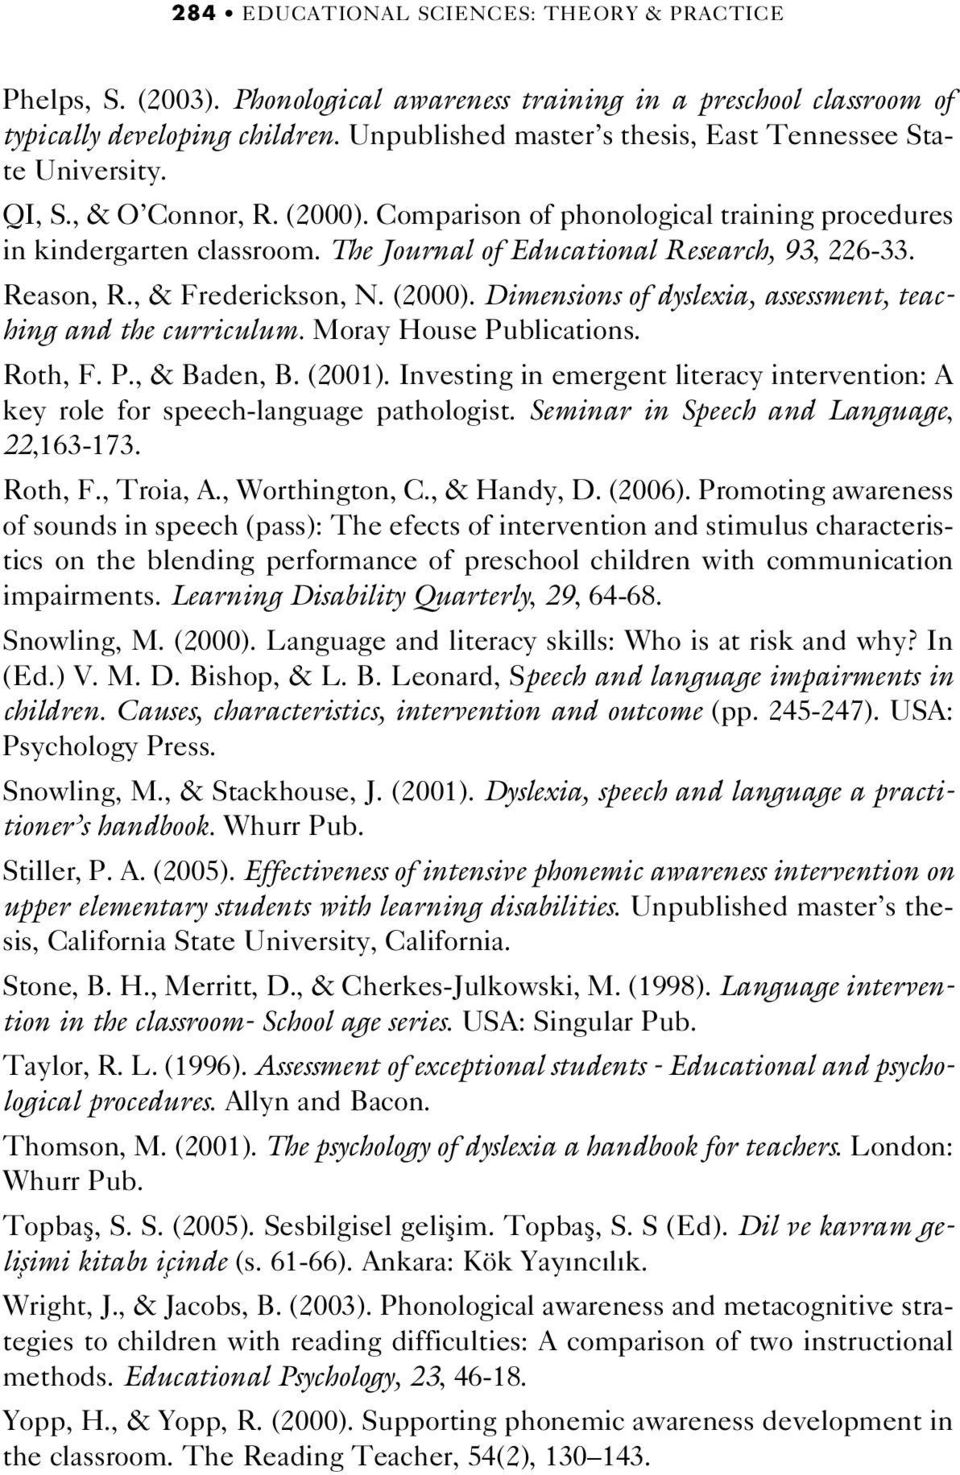 The Journal of Educational Research, 93, 226-33. Reason, R., & Frederickson, N. (2000). Dimensions of dyslexia, assessment, teaching and the curriculum. Moray House Publications. Roth, F. P., & Baden, B.